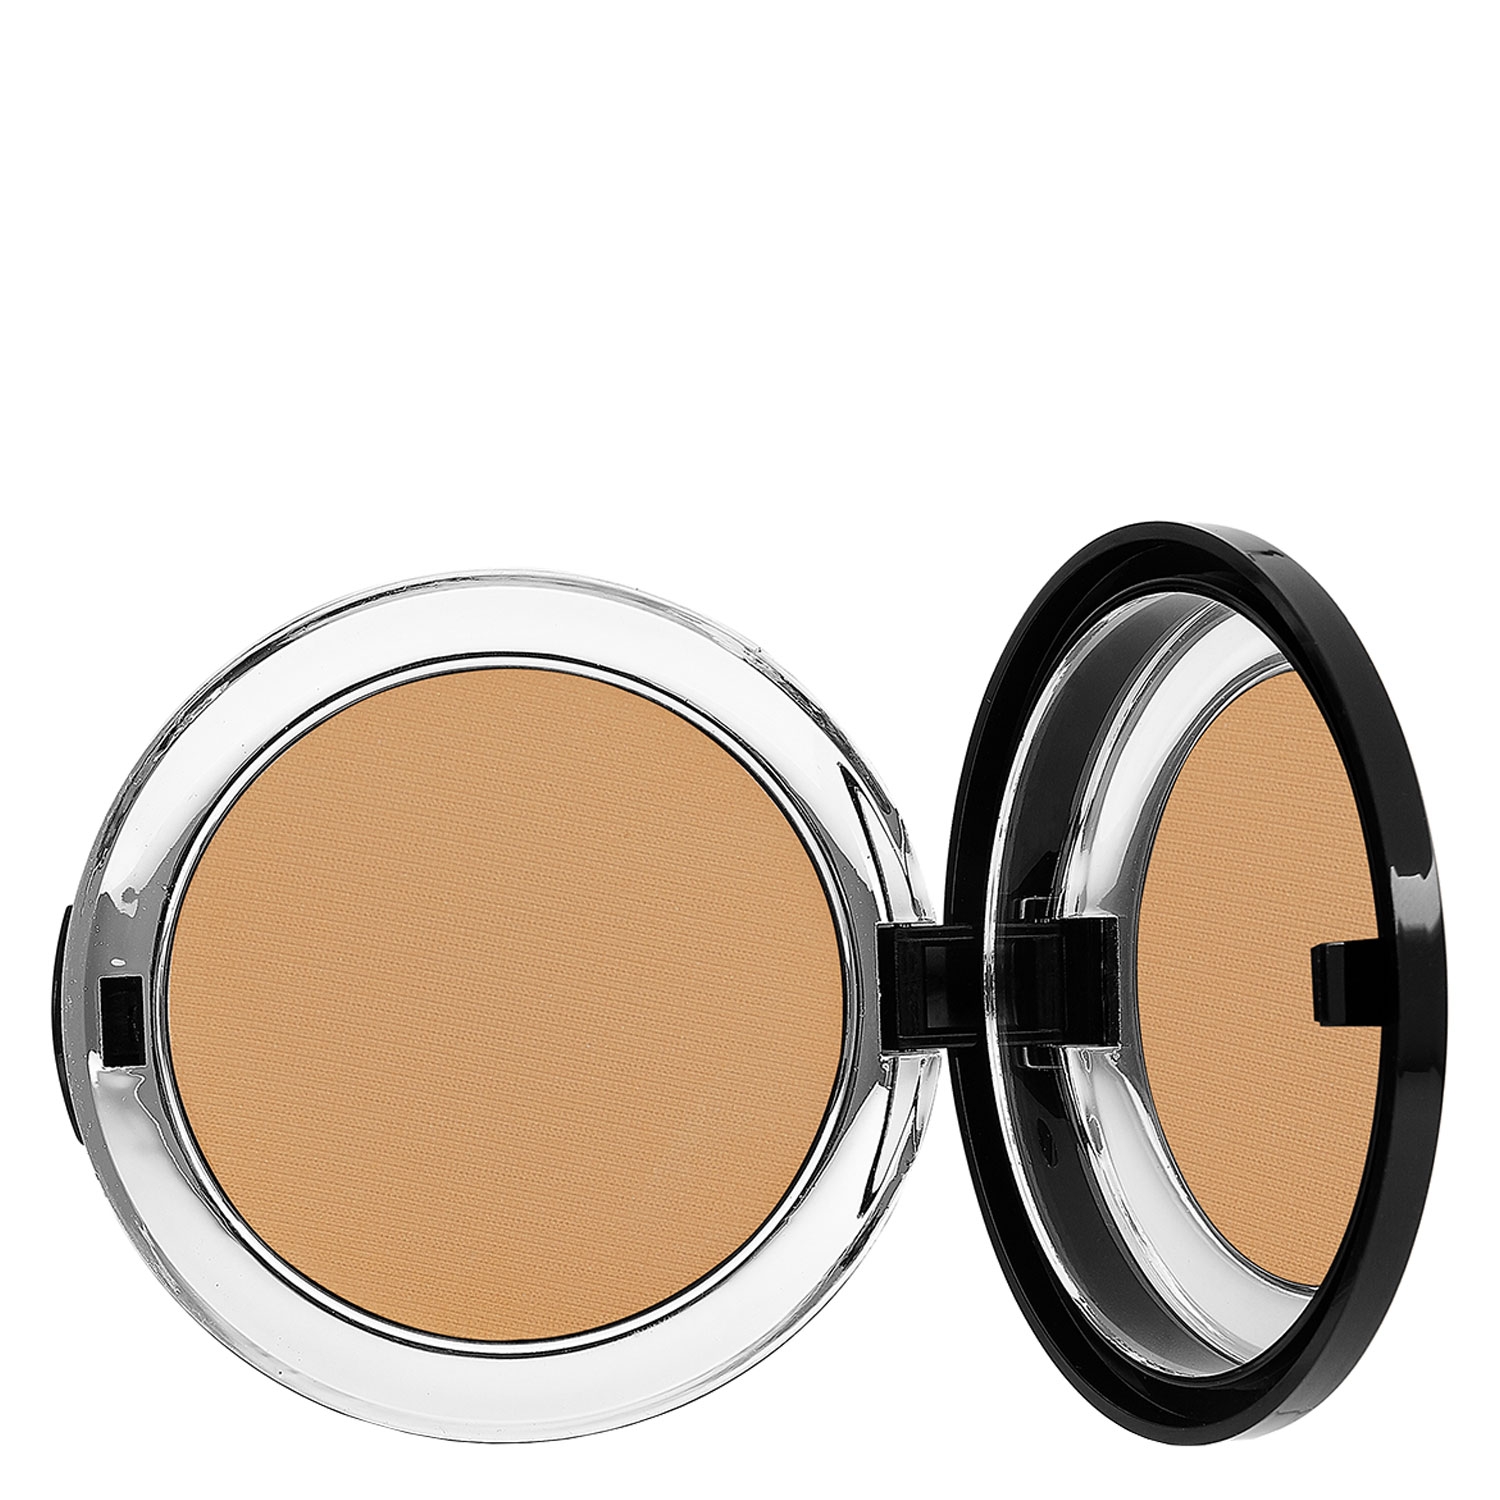 Product image from bellapierre Teint - Compact Mineral Foundation SPF15 Maple